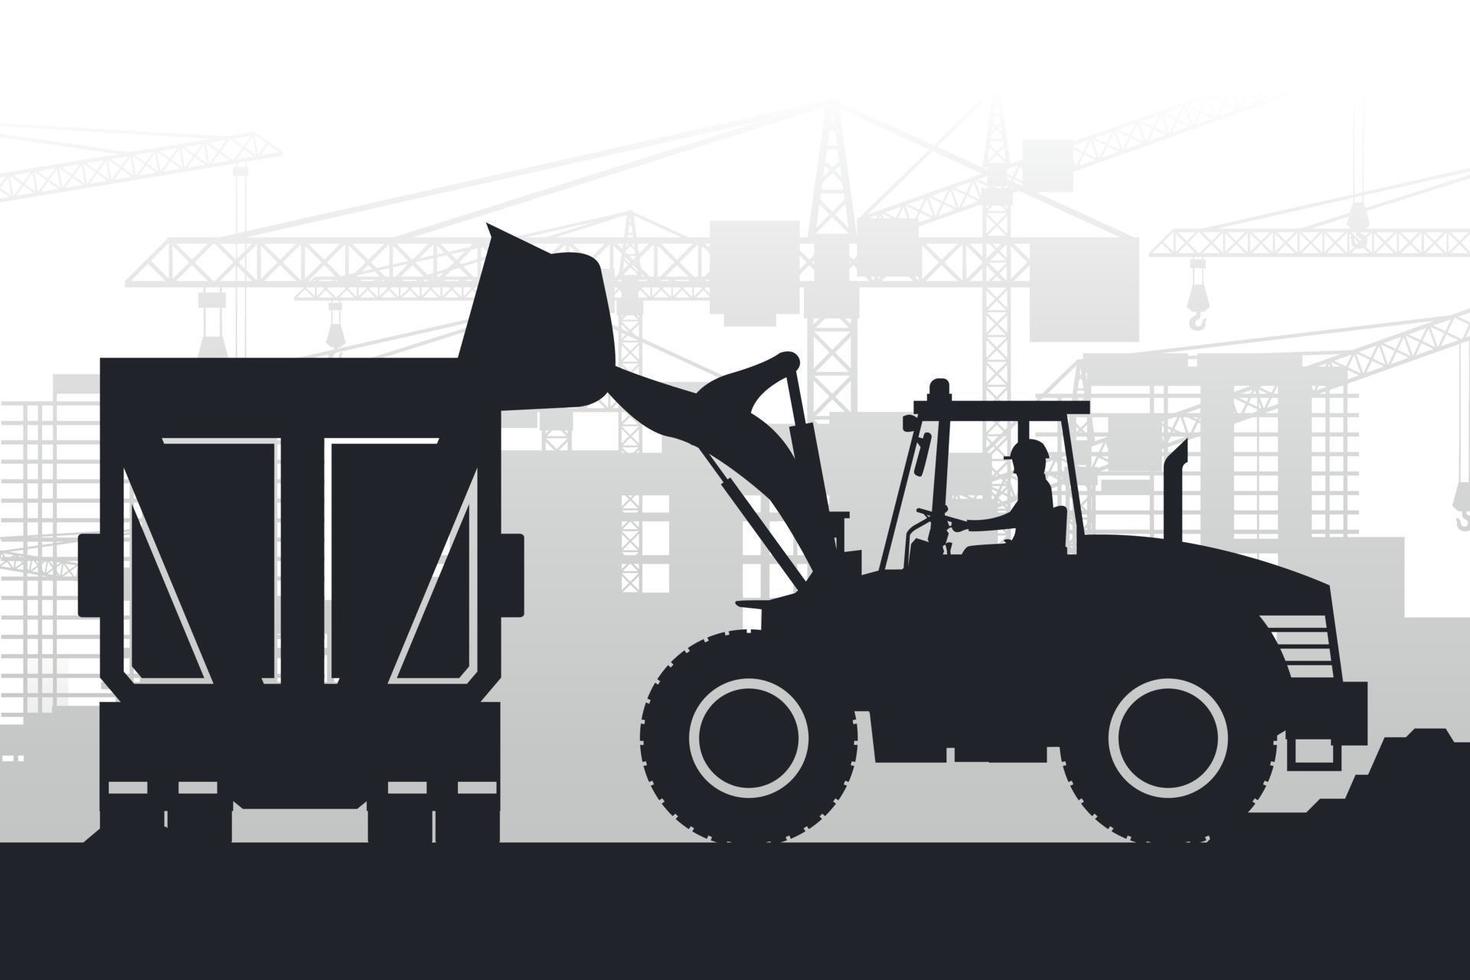 Silhouettes of heavy machinery with the operator driving a front loader and filling a truck with materials over a city under construction vector